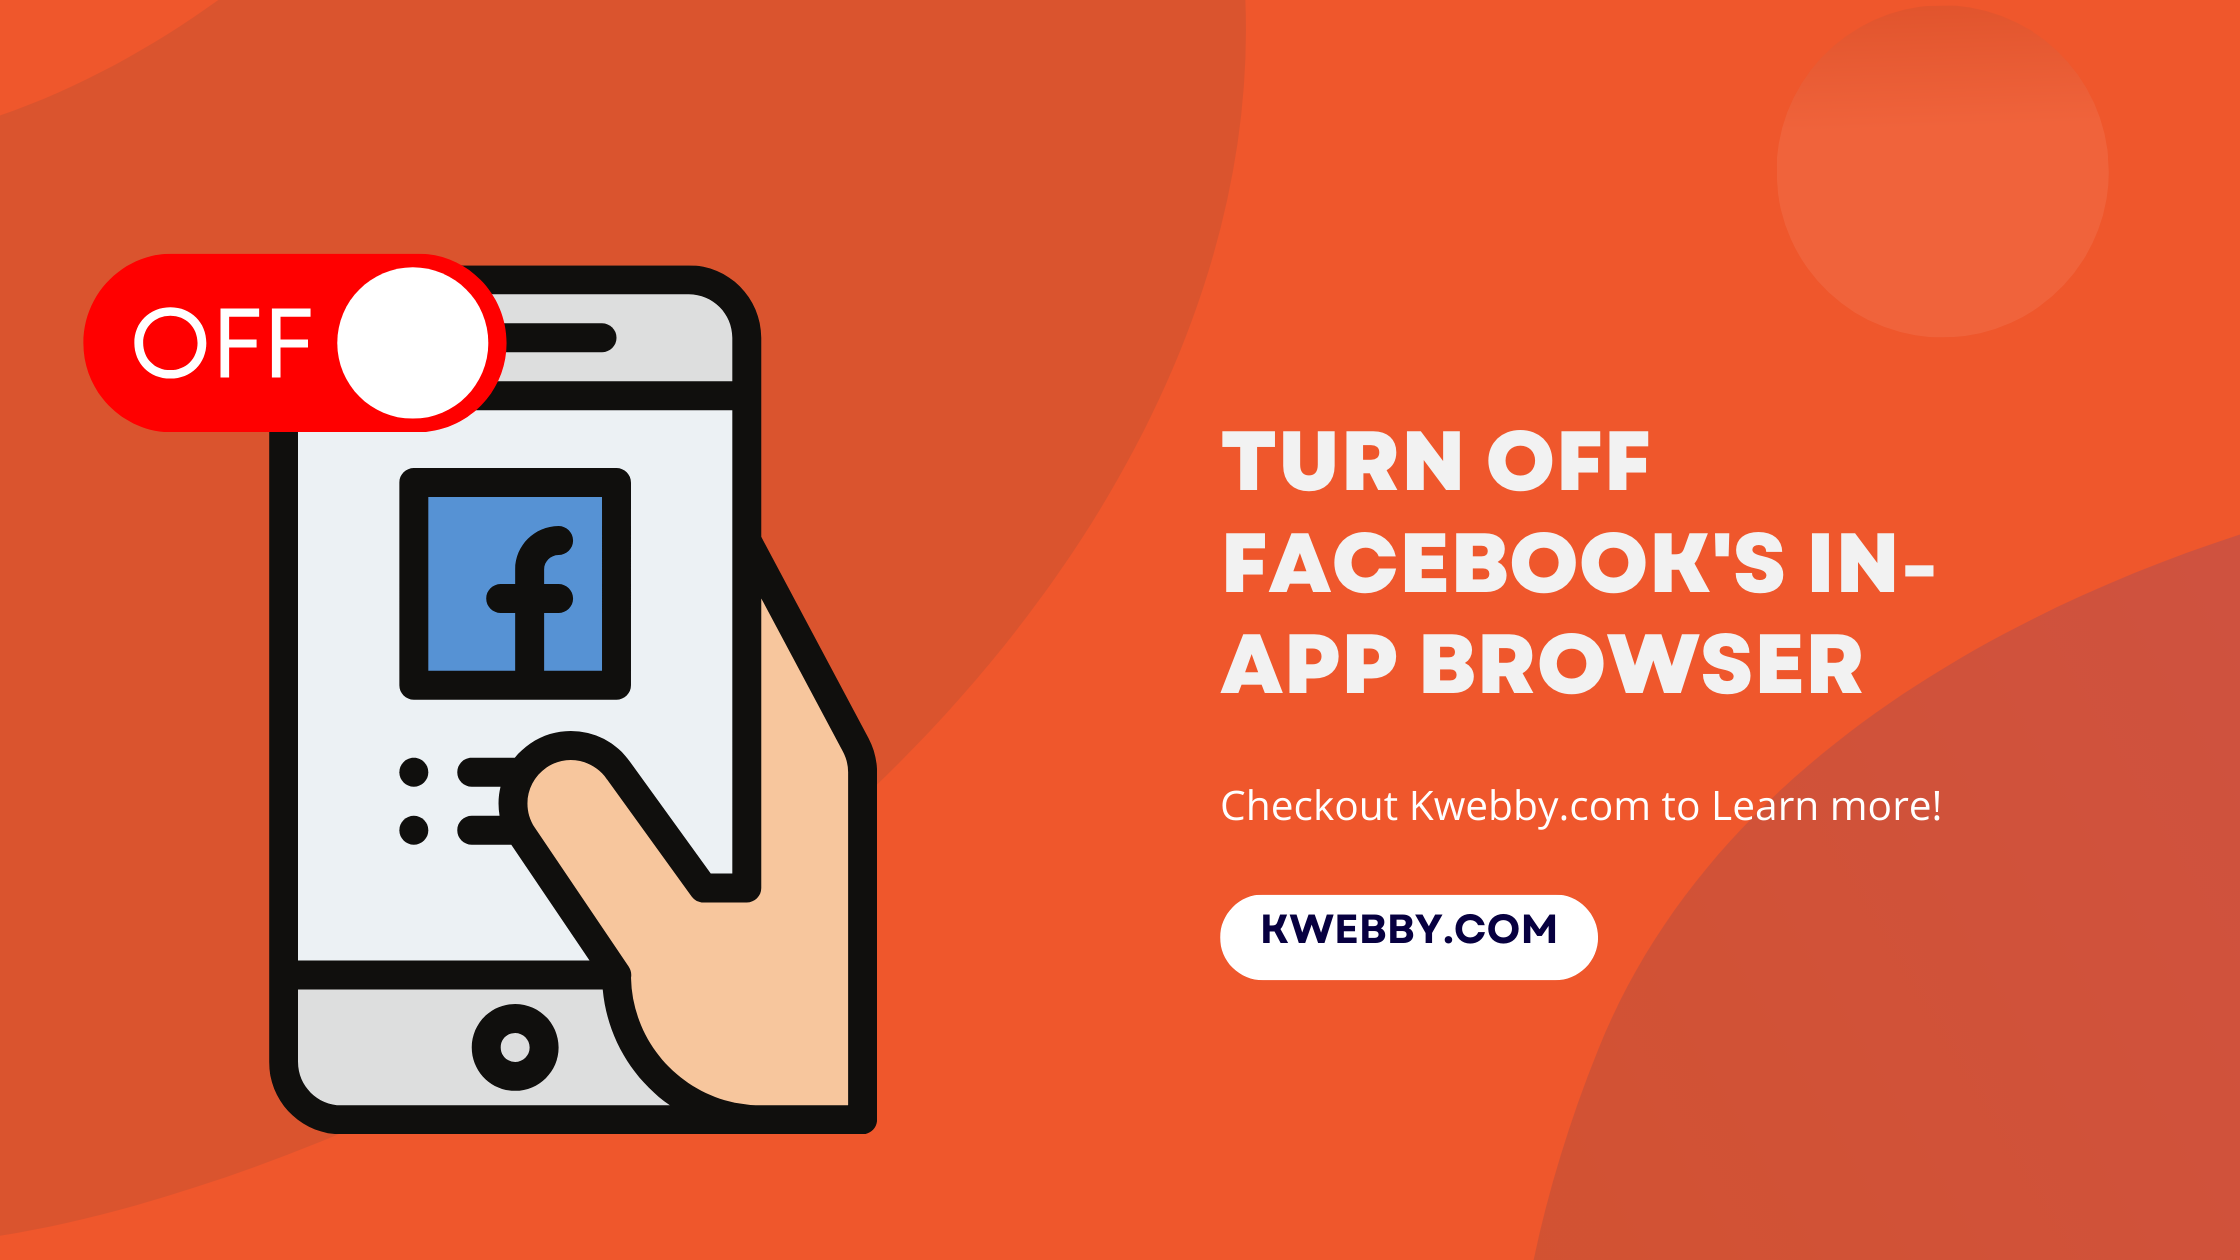 How Can You Turn Off Facebook's In-App Browser? 